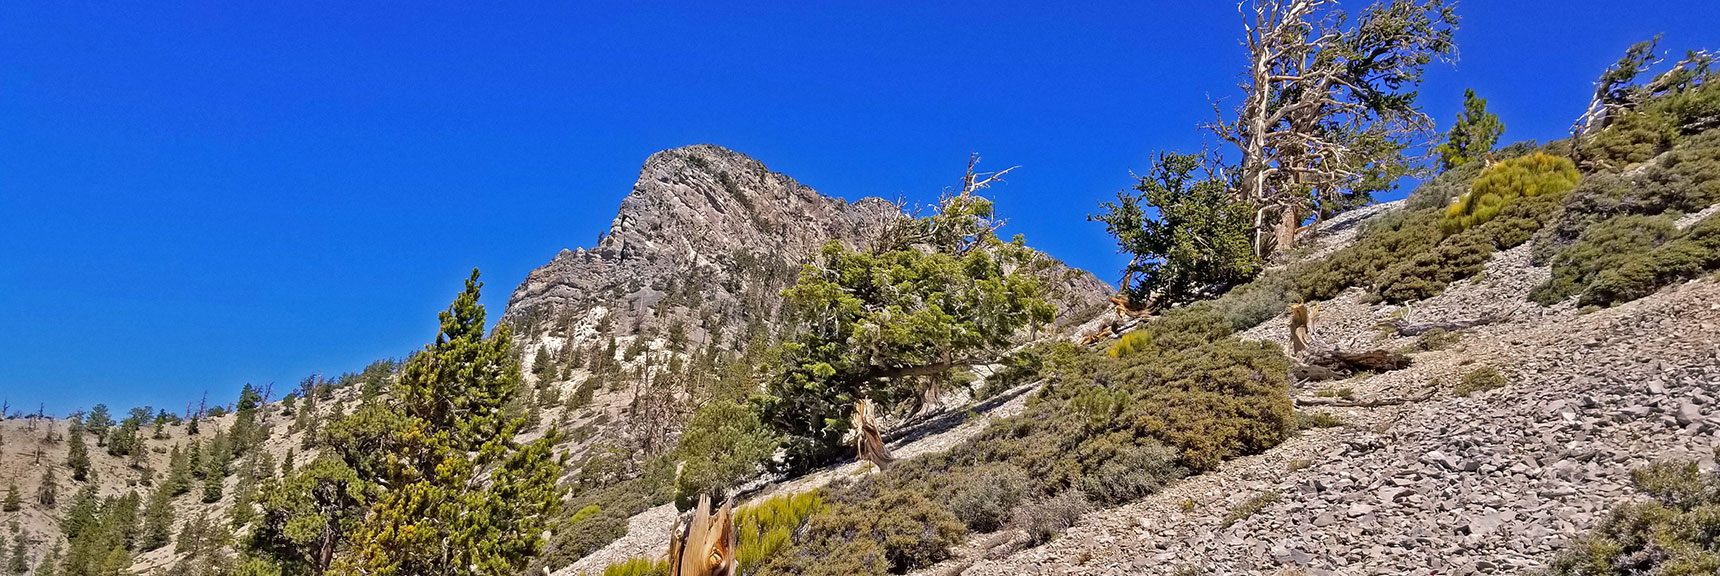 Note Faint Trail, Some Cairns, But Just Stay on the Approach Ridge| Macks Peak | Mt Charleston Wilderness | Spring Mountains, Nevada